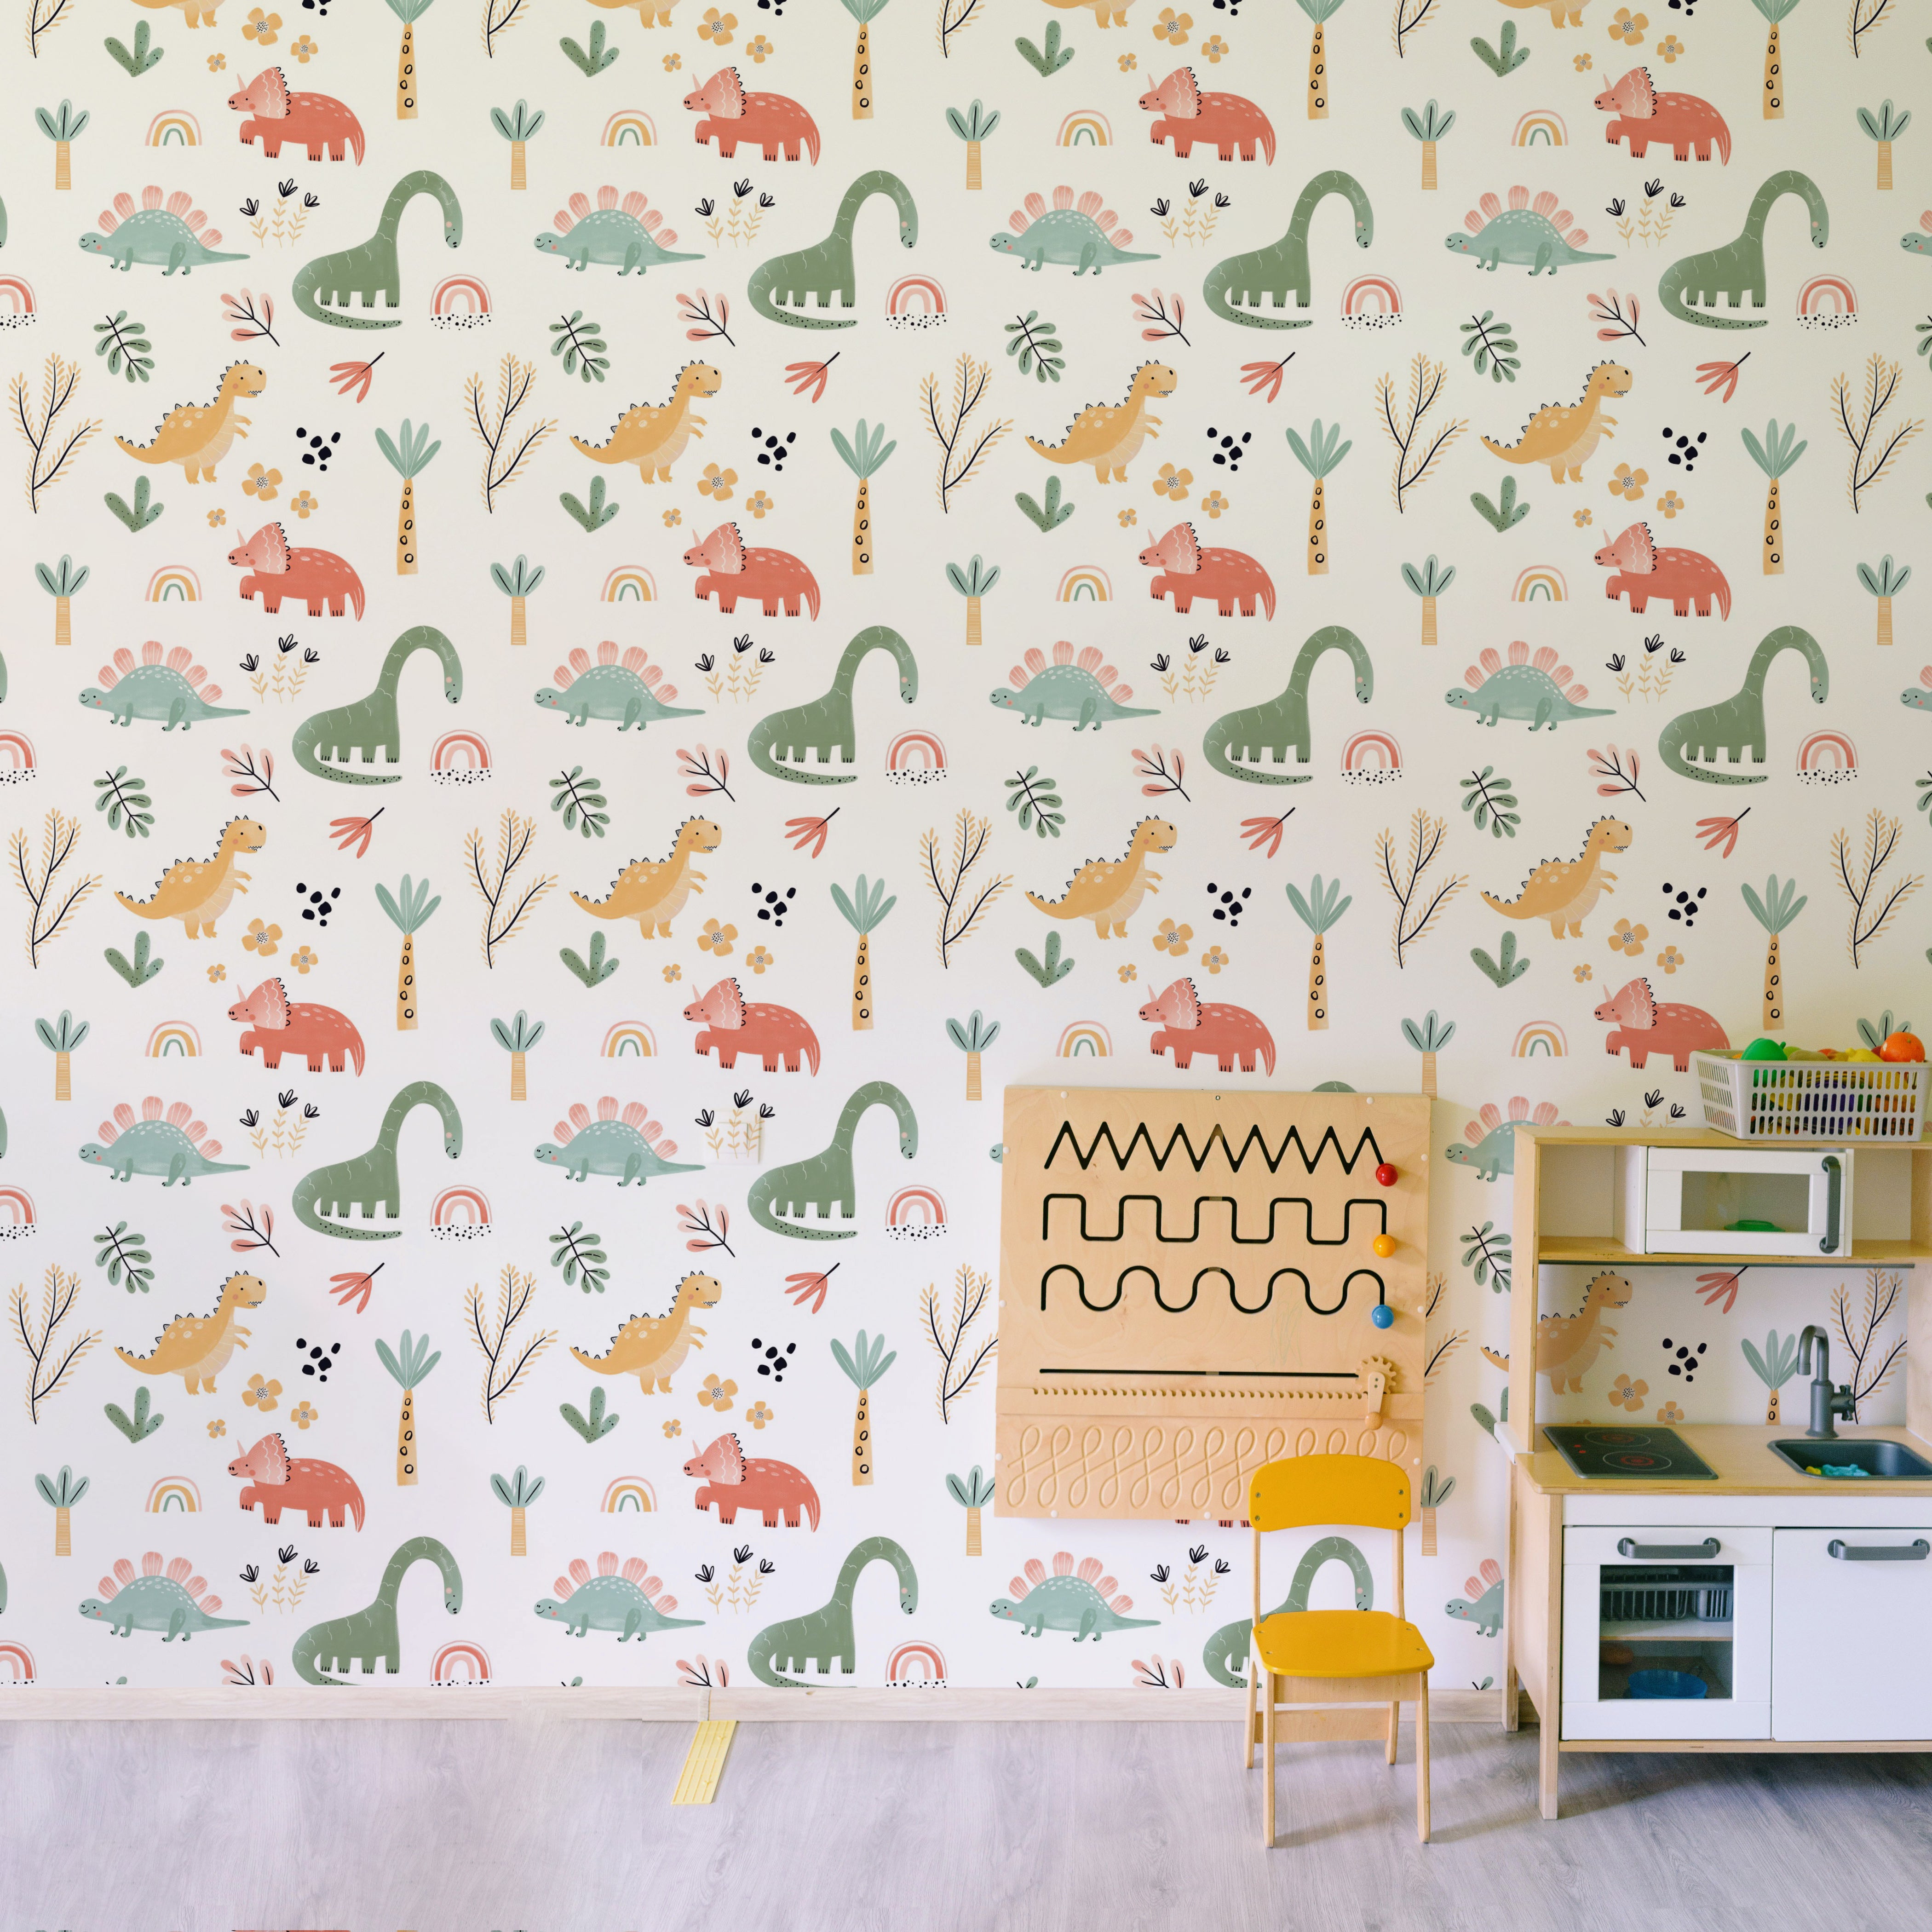 A well-lit nursery corner showcasing the Dinosaur Nursery Wallpaper as a delightful backdrop to a modern play kitchen, with dinosaur and nature motifs scattered in soft, playful hues, inspiring imagination and adventure in any child's room.